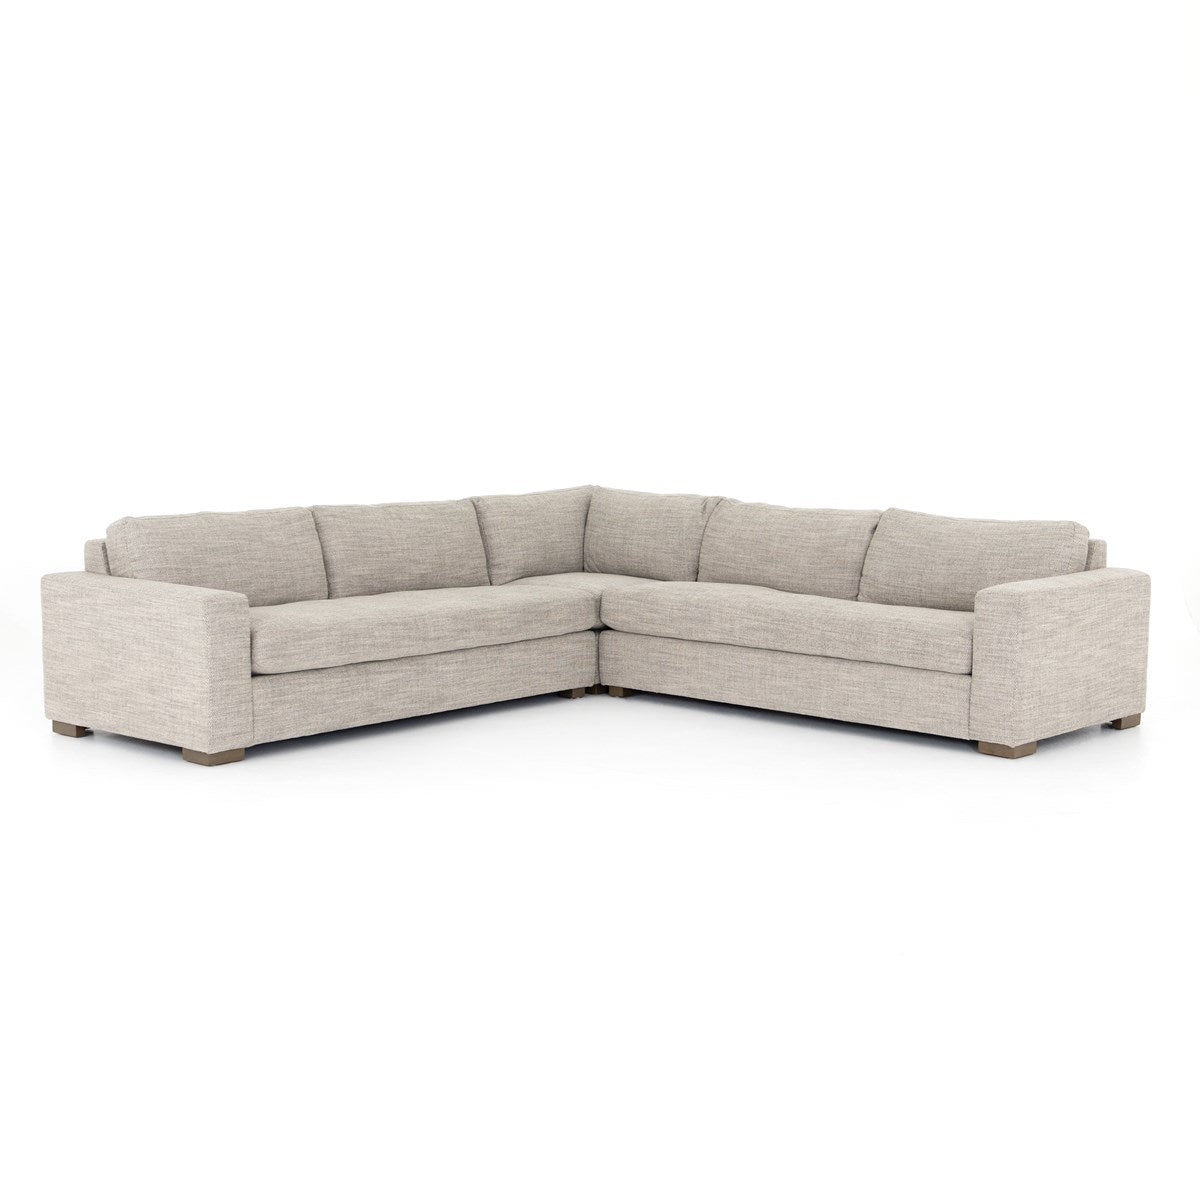 Boone 3-Piece Sectional SmallSectional Sofa Four Hands  Small   Four Hands, Burke Decor, Mid Century Modern Furniture, Old Bones Furniture Company, Old Bones Co, Modern Mid Century, Designer Furniture, https://www.oldbonesco.com/